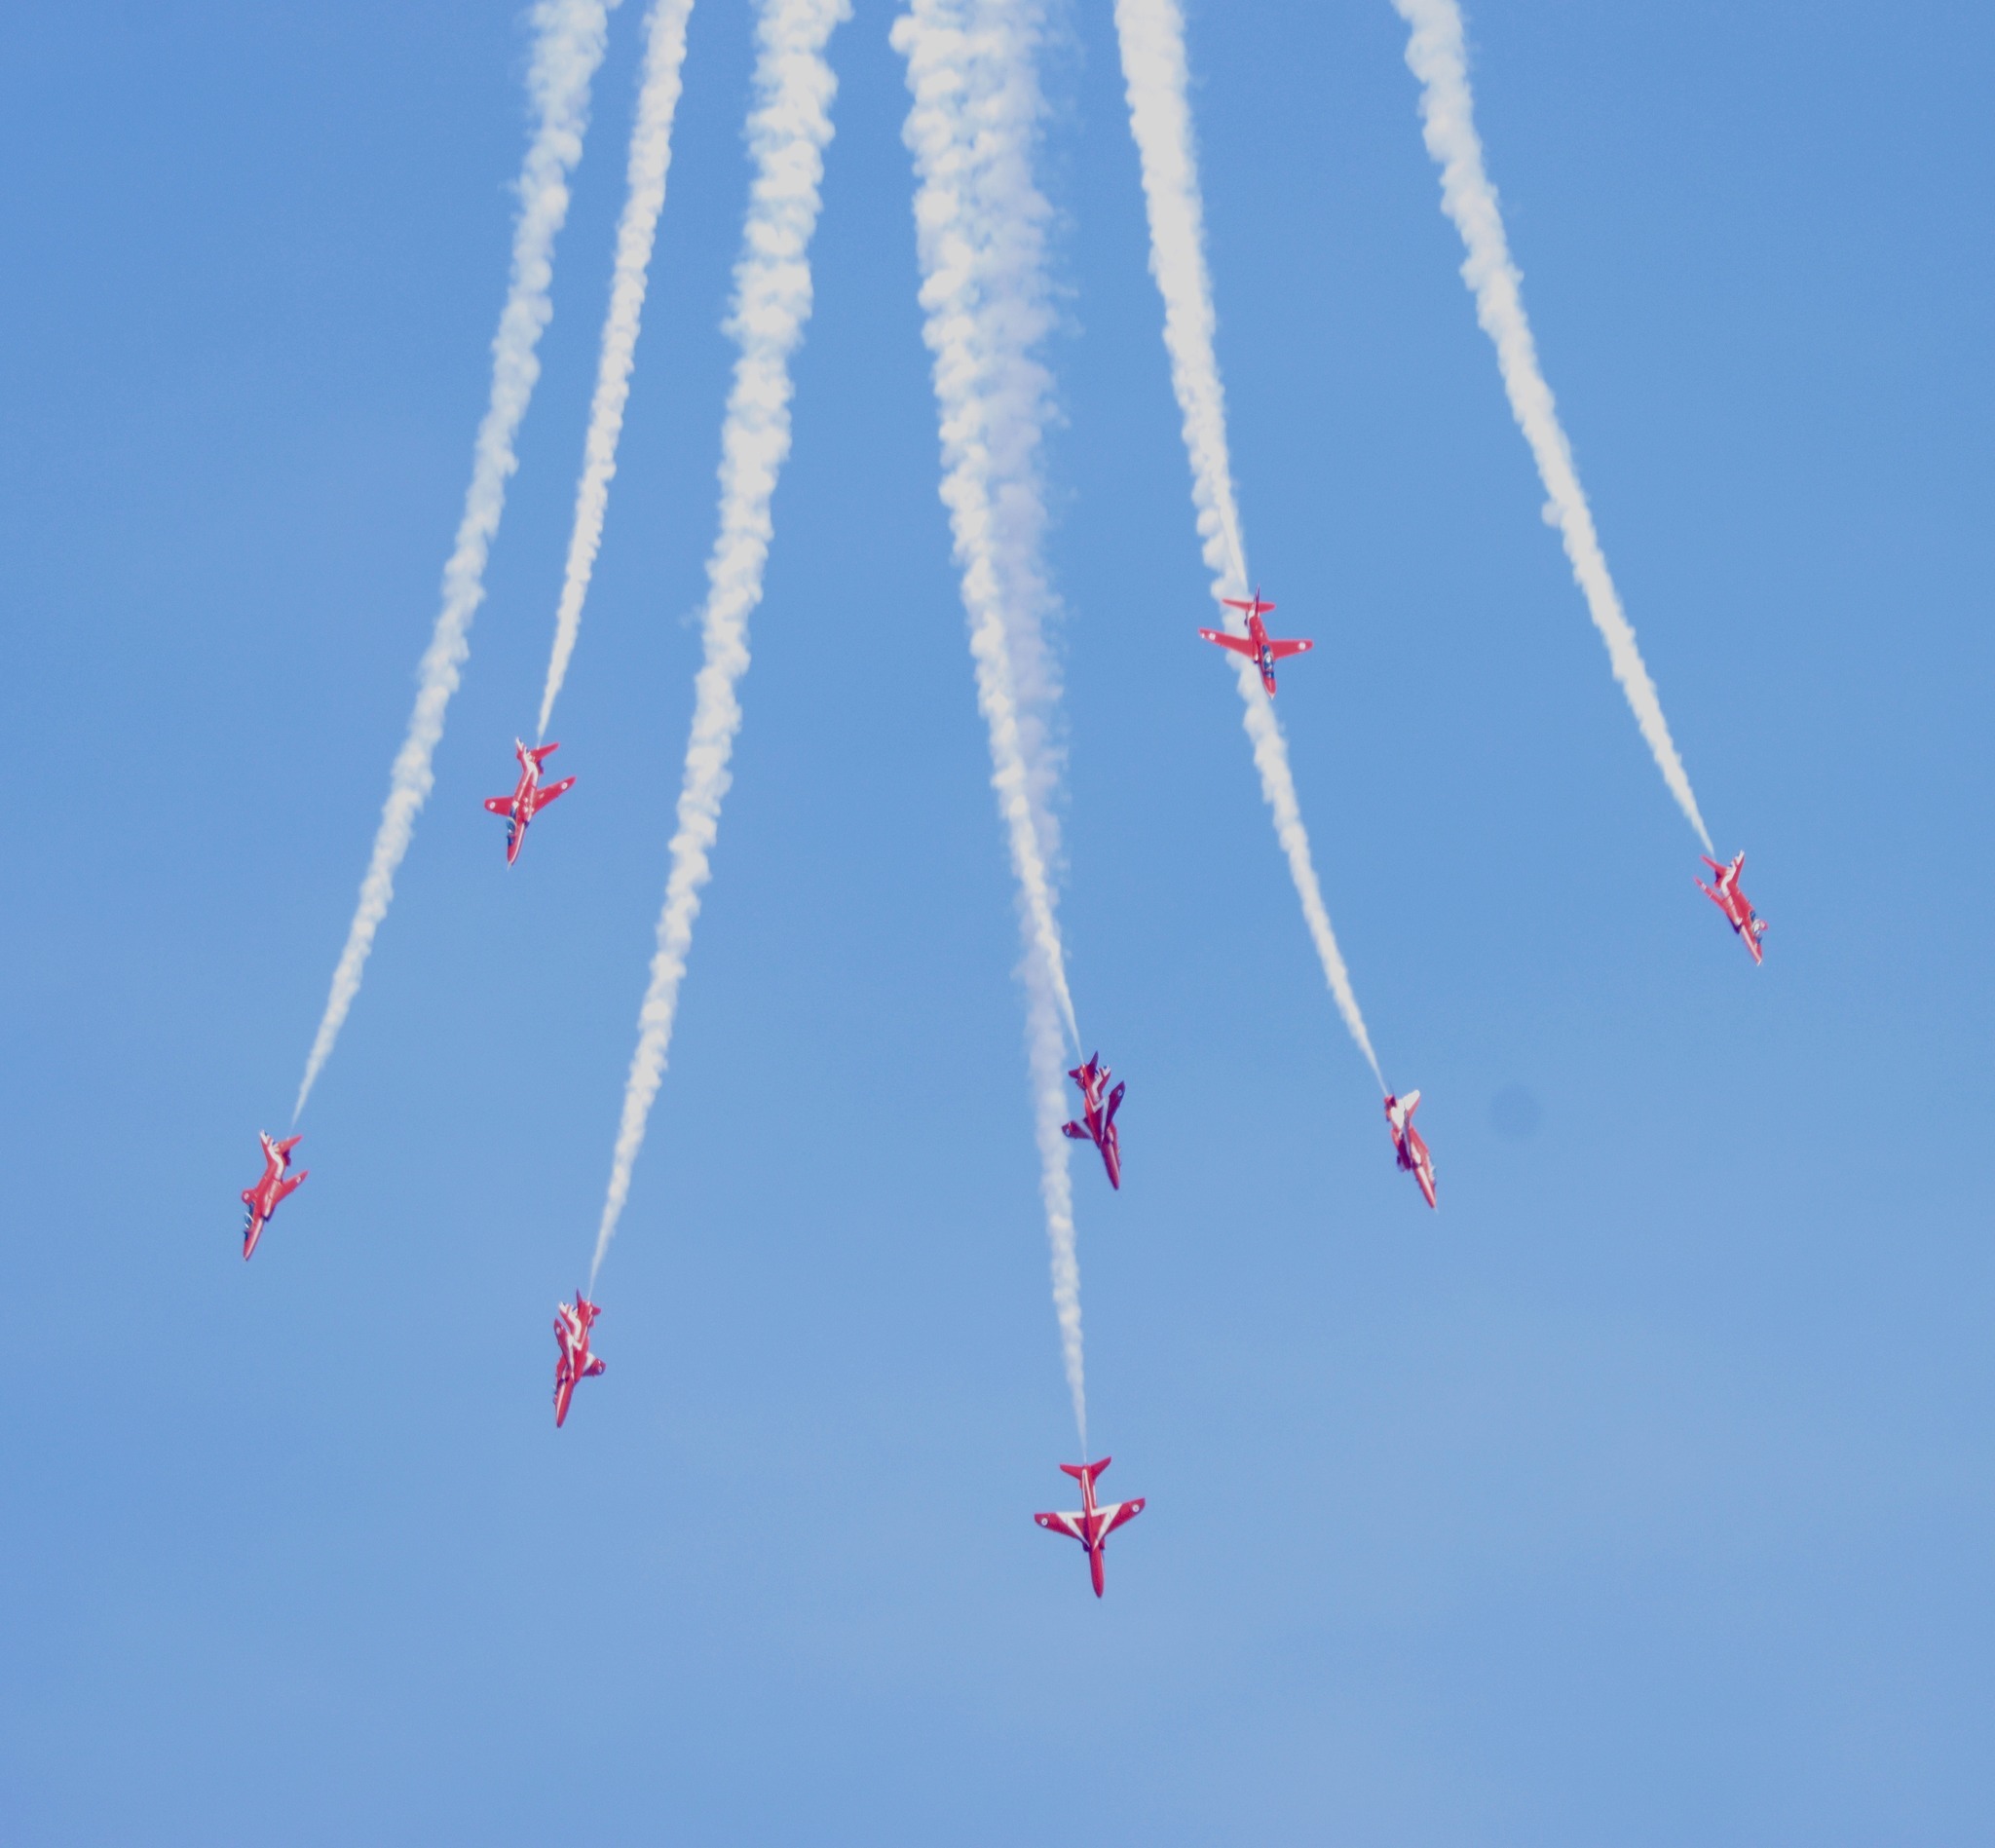 The Red Arrows practising for the Kings coronation by Mark Garner